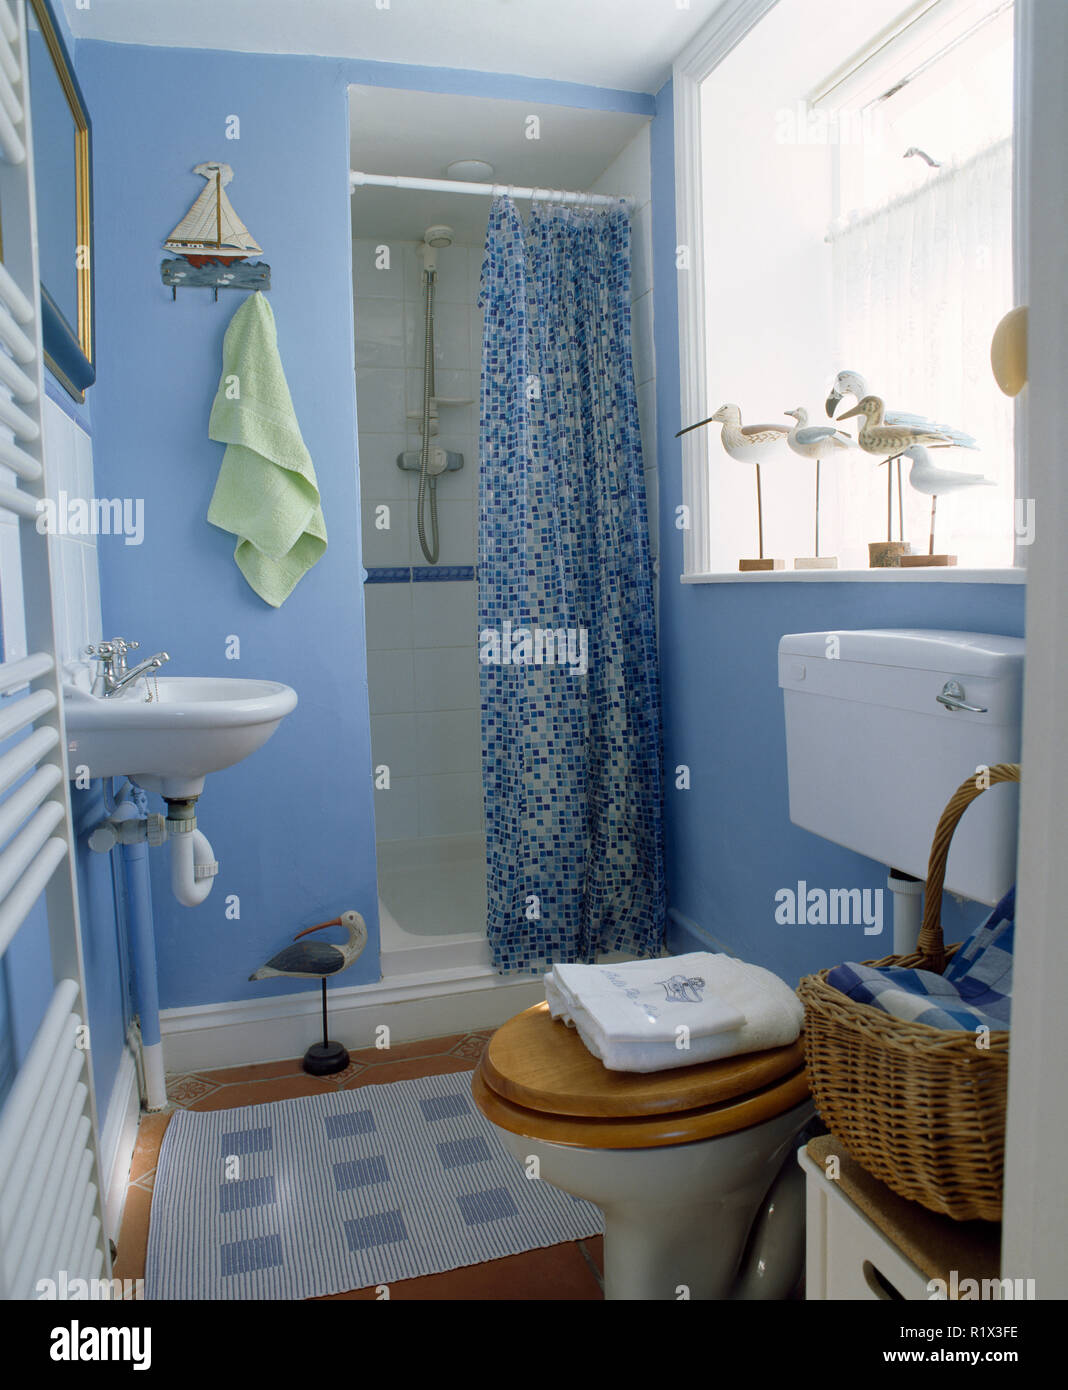 Blue bathroom with patterned curtain on shower recess Stock Photo